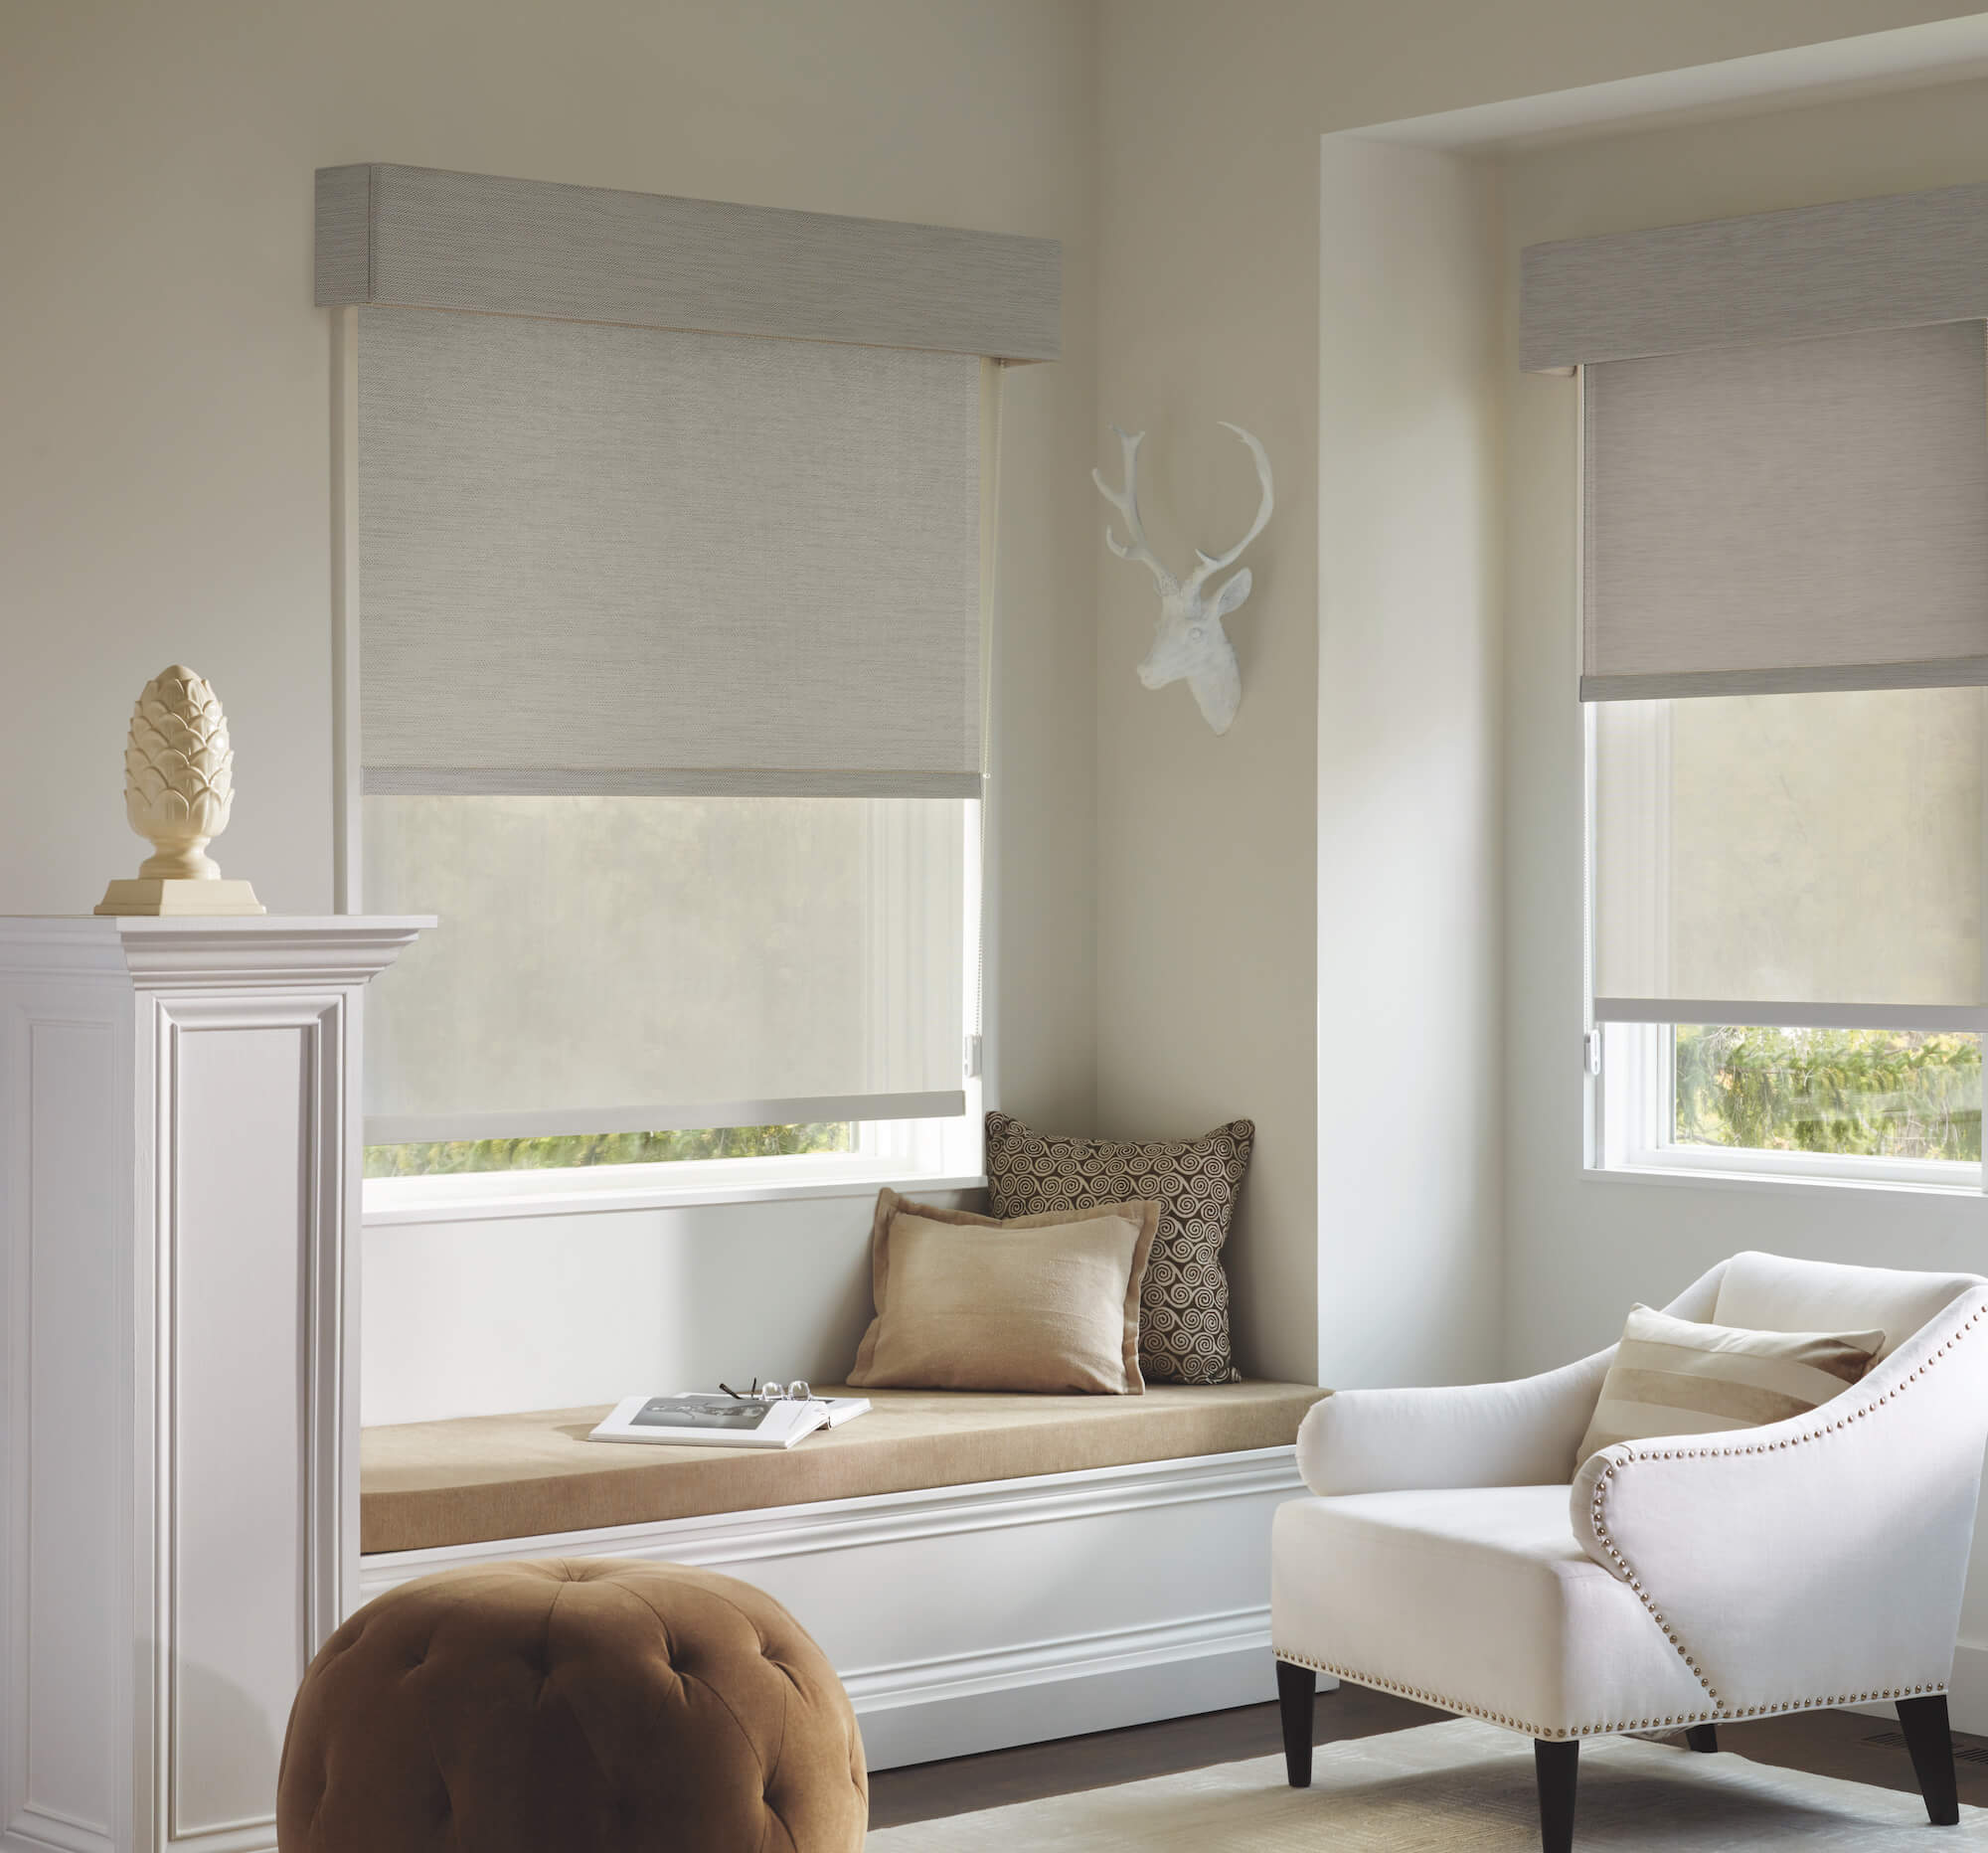 Designer Screen Shades in lounge area